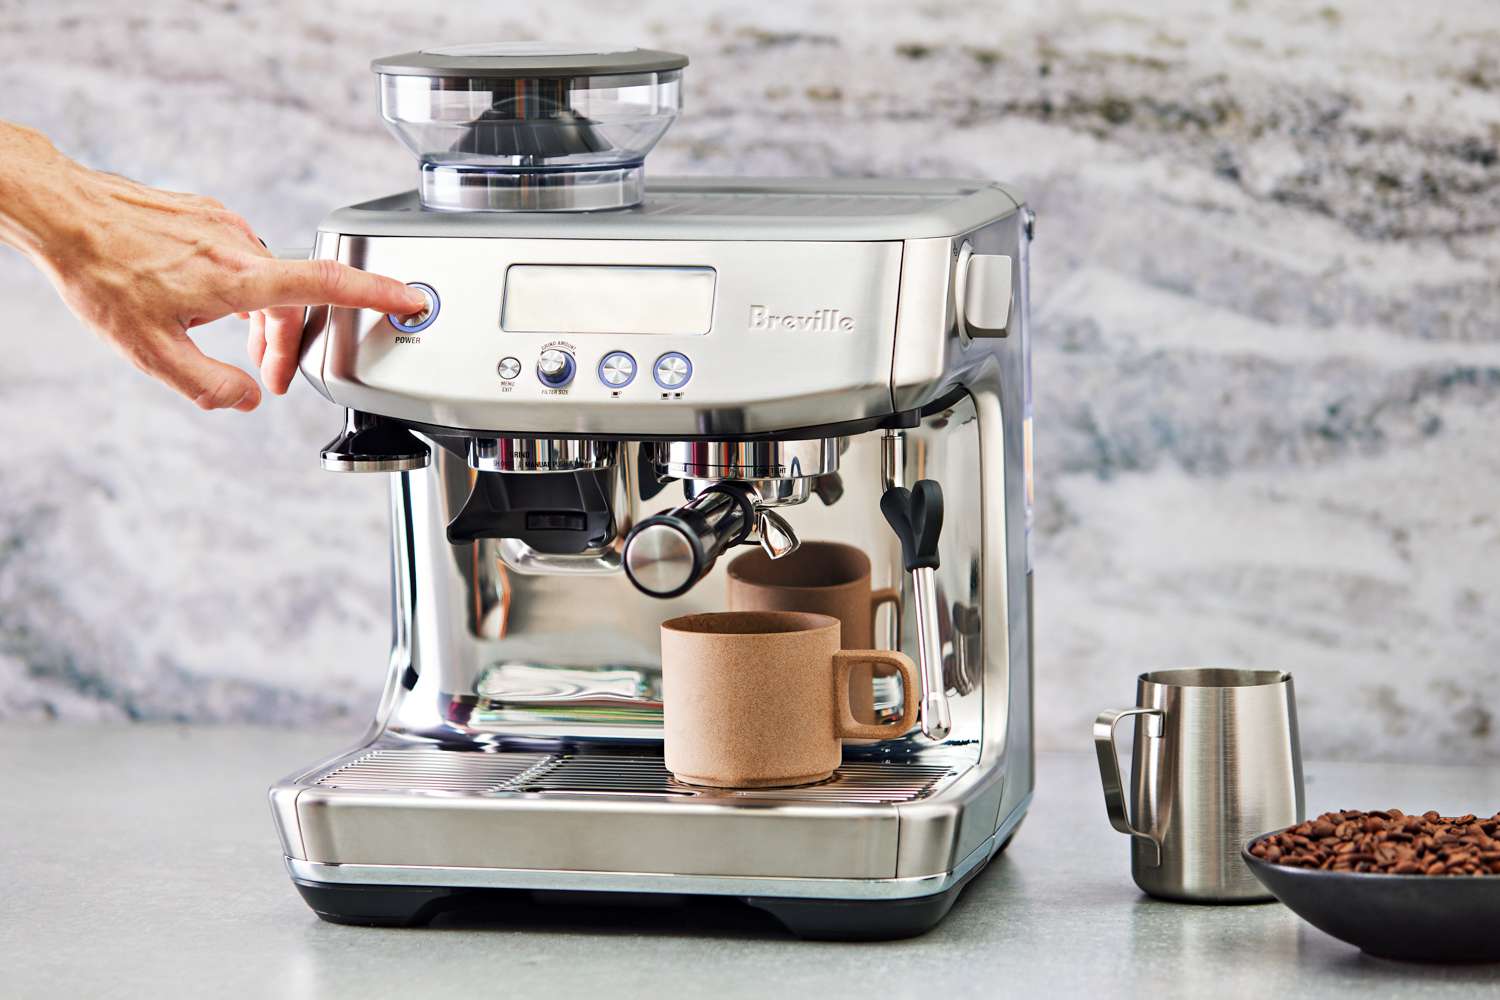 Top Coffee Maker Review: Find the Perfect Brew